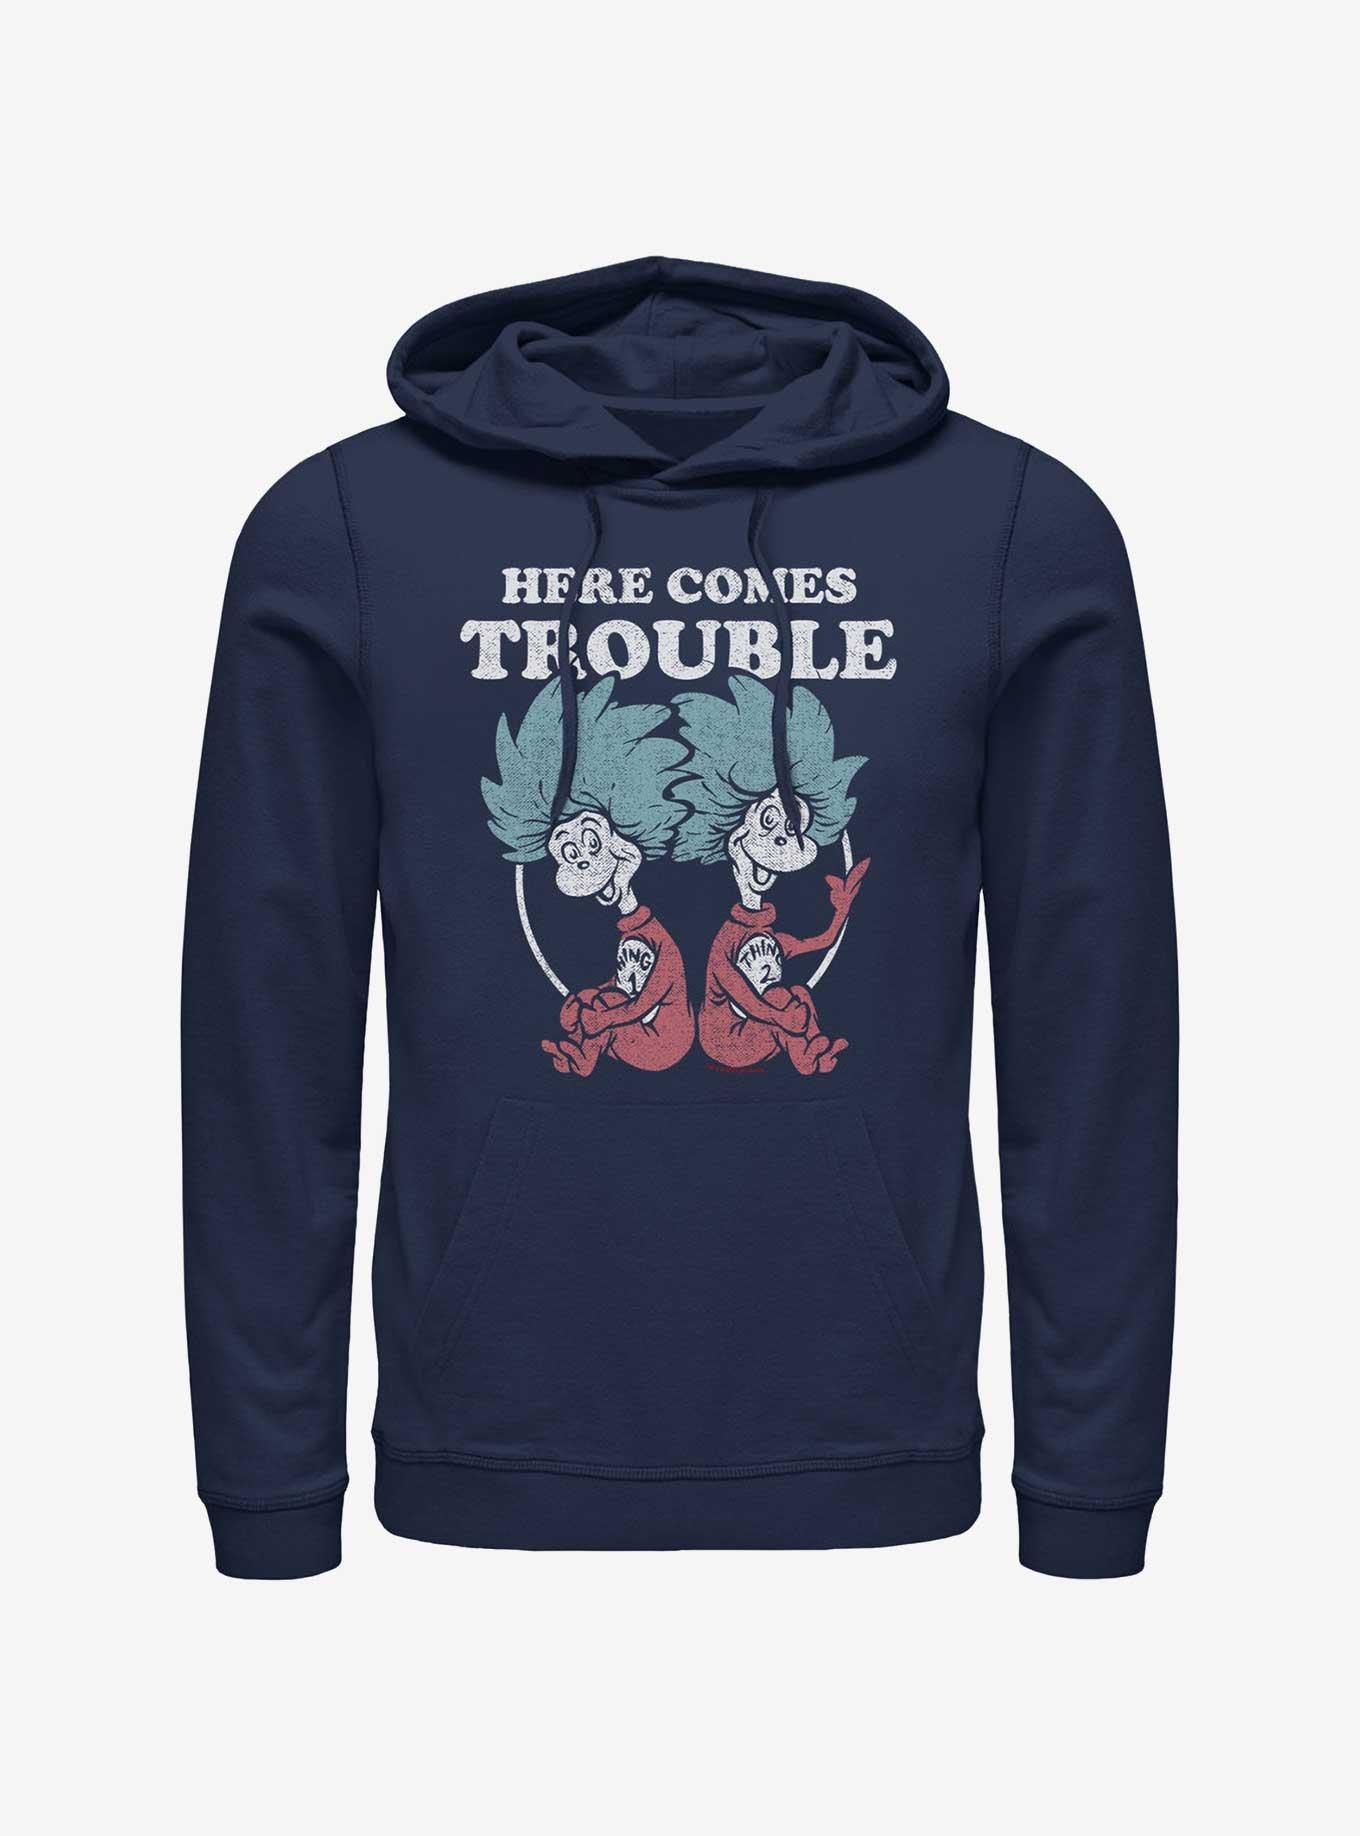 Dr. Seuss Thing 1 and Thing 2 Trouble Hoodie, NAVY, hi-res